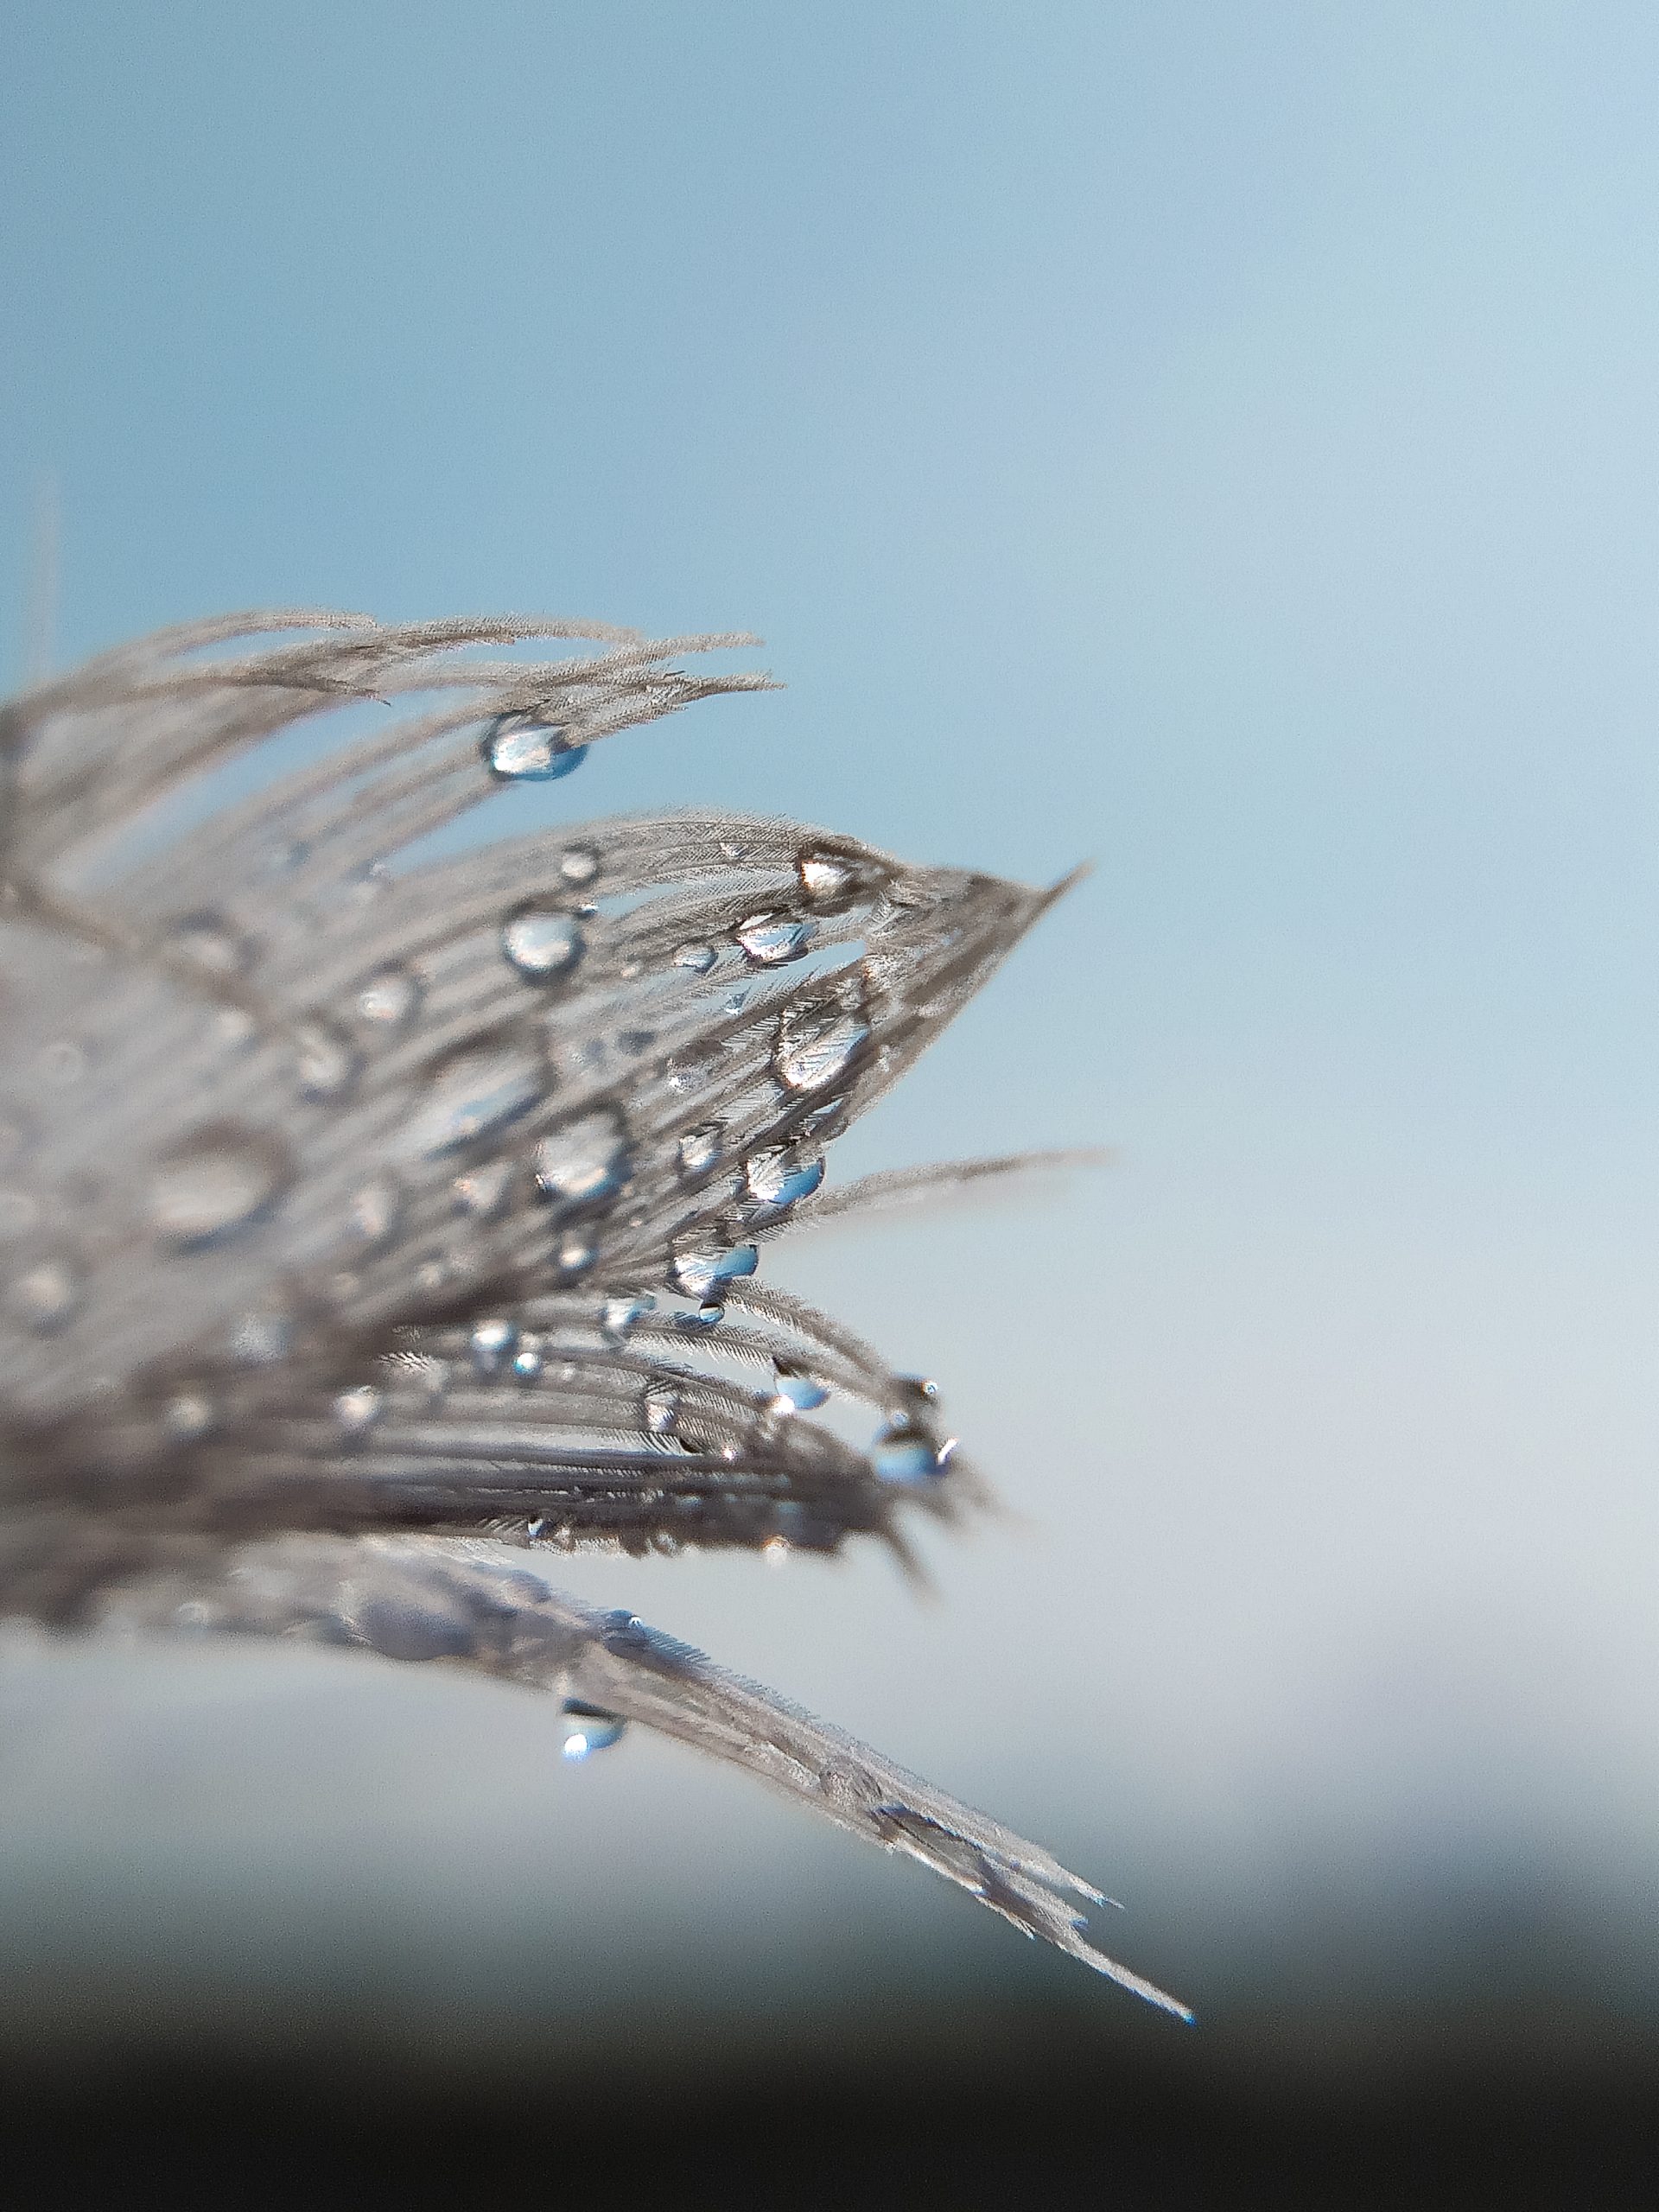 Droplets on a feather